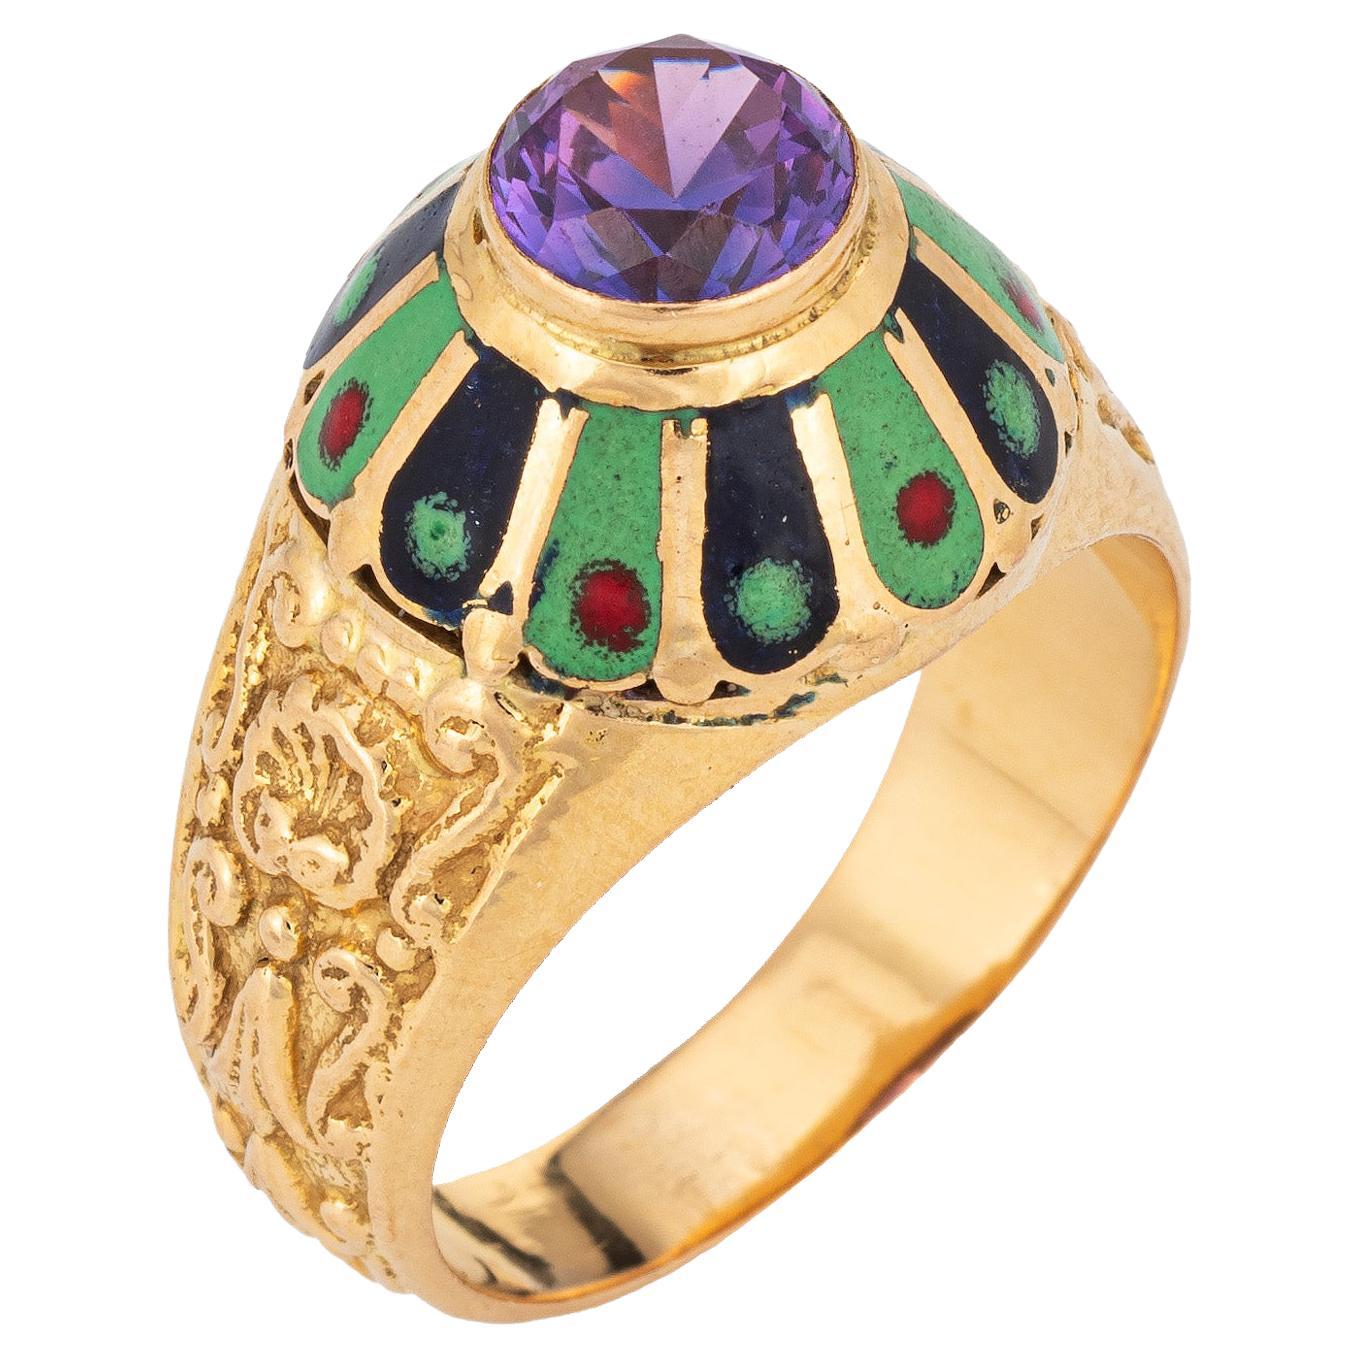 Portuguese Amethyst Enamel Ring Vintage 19k Yellow Gold Mid Century Jewelry For Sale